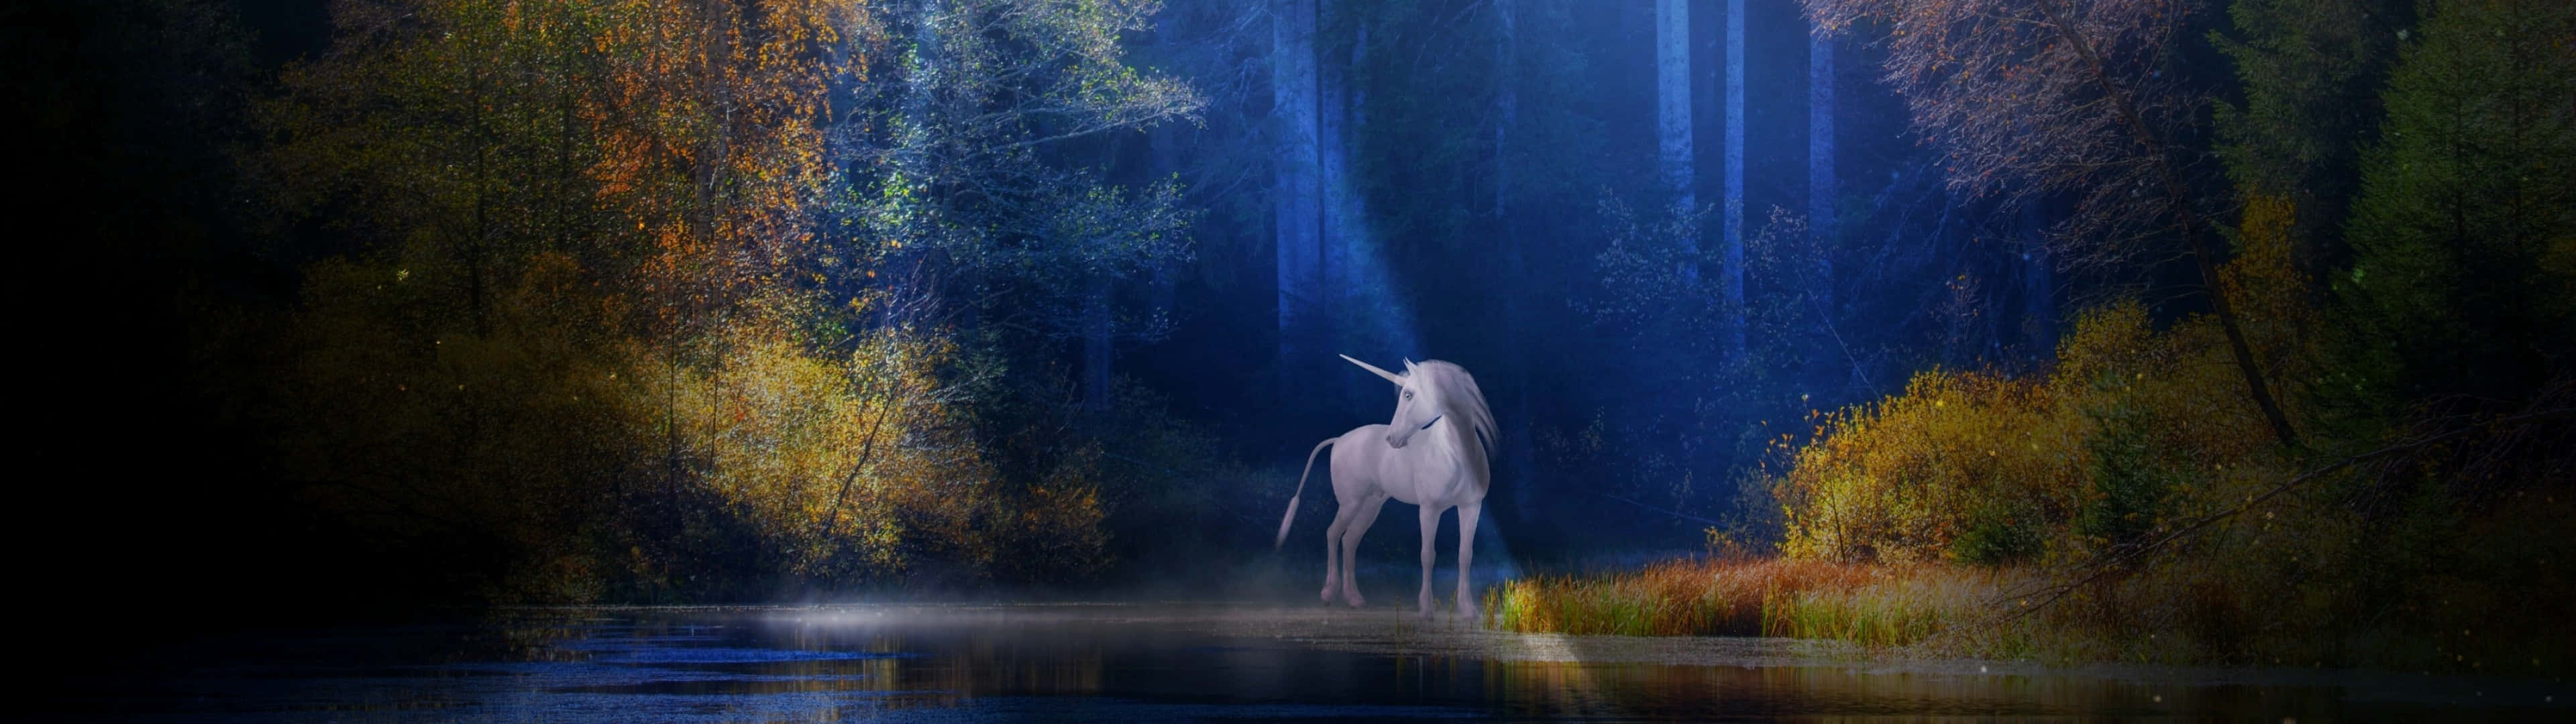 Feel The Magic With This Mystical Unicorn Wallpaper